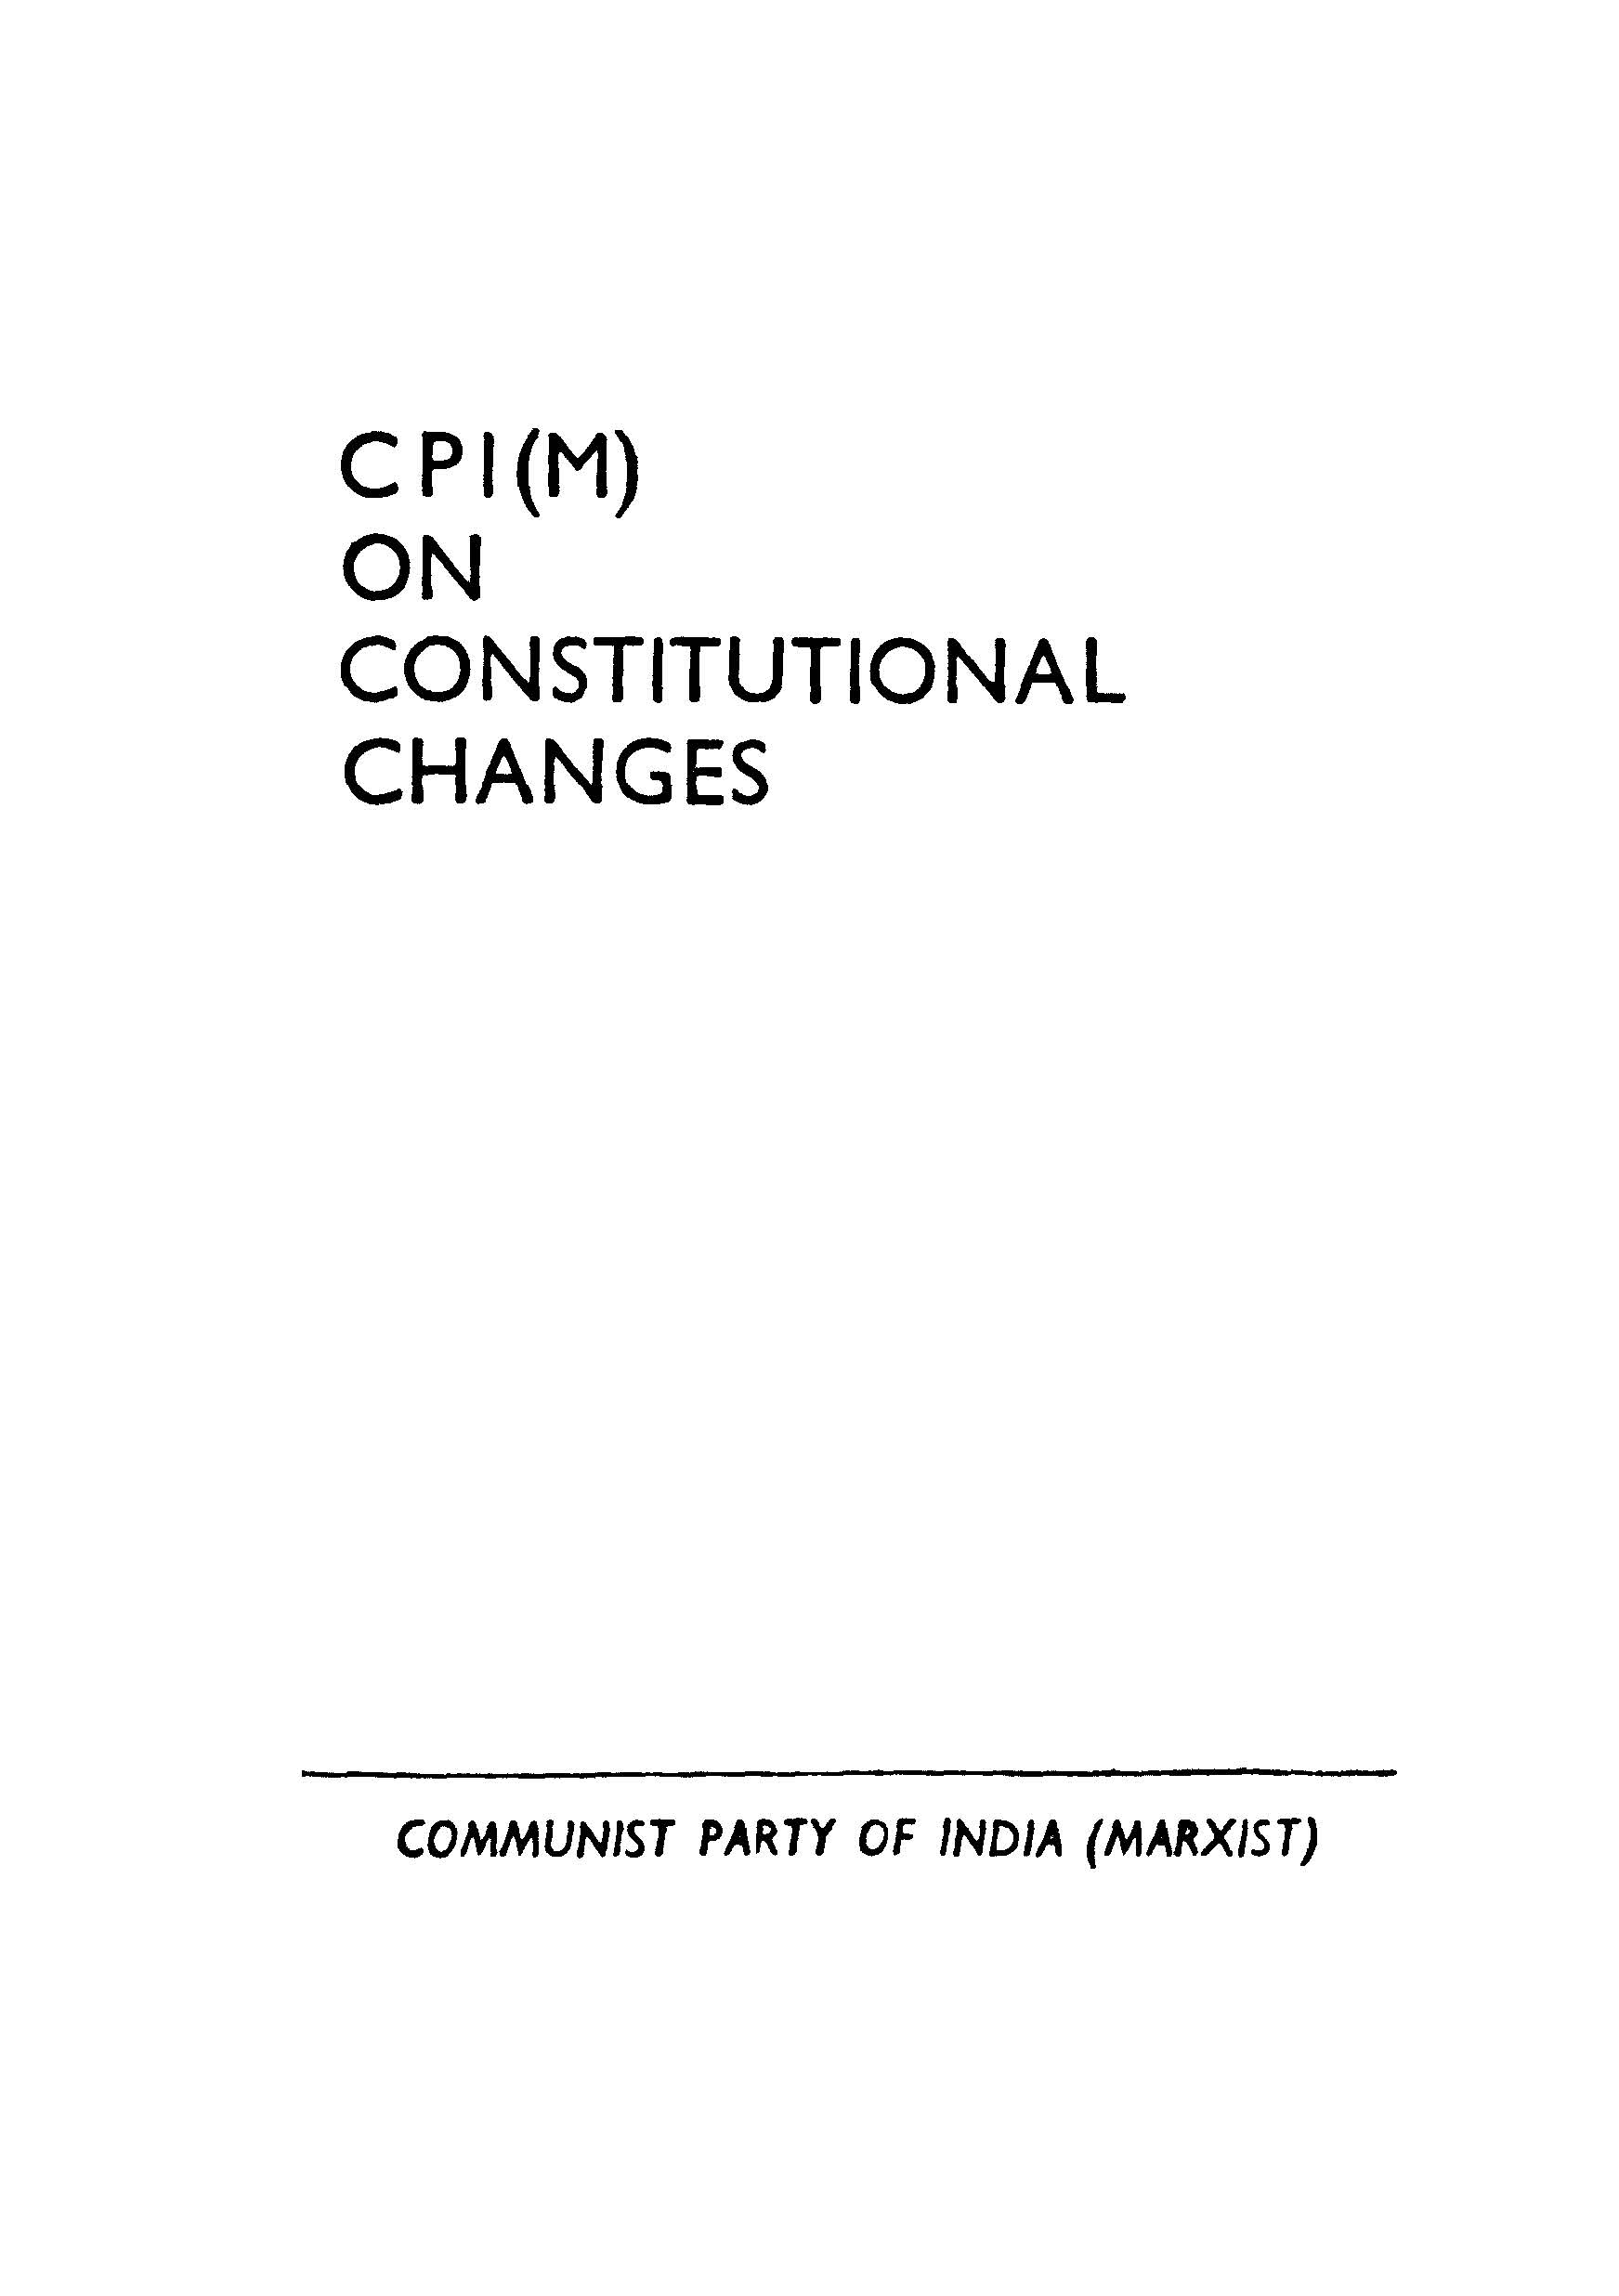 Cpi(m) on constitutional changes